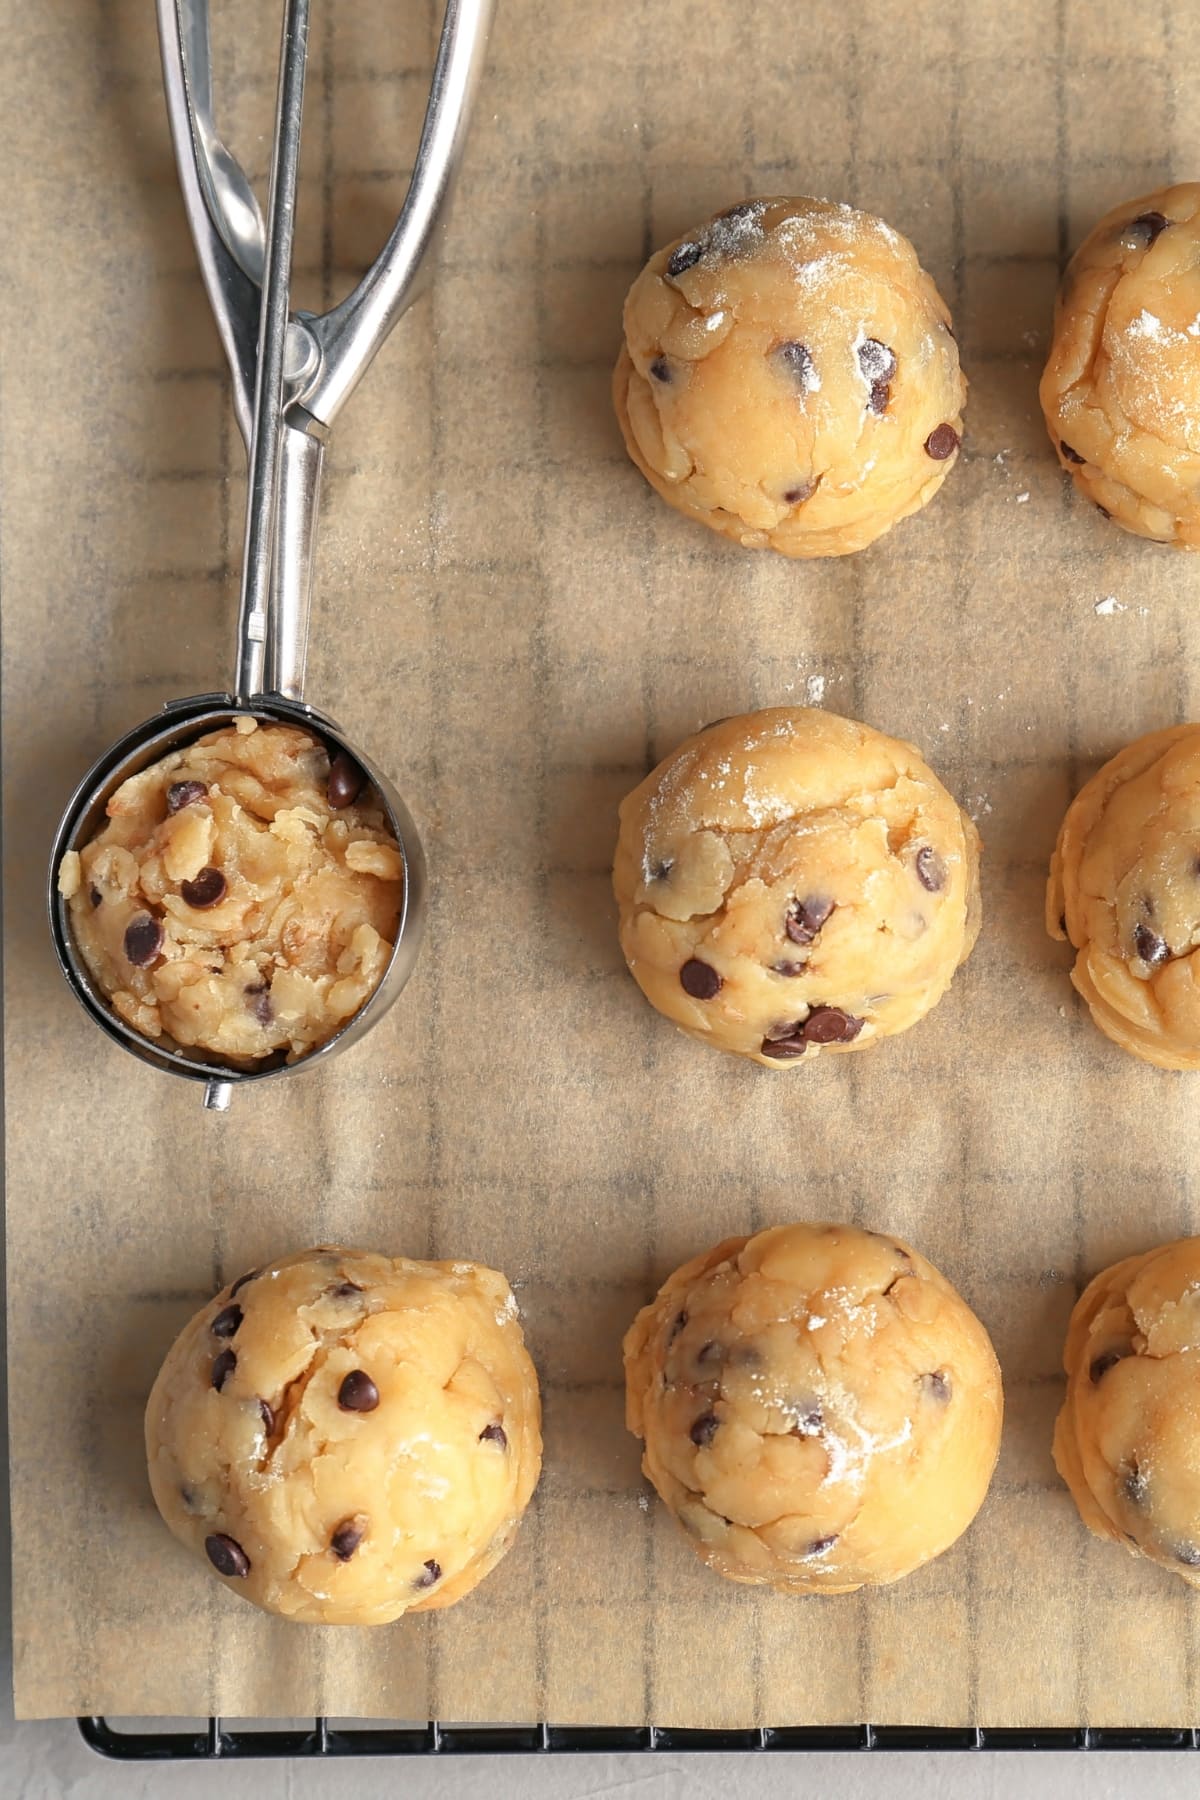 Raw Cookie Dough With Chocolate Chips on a Parchment Paper